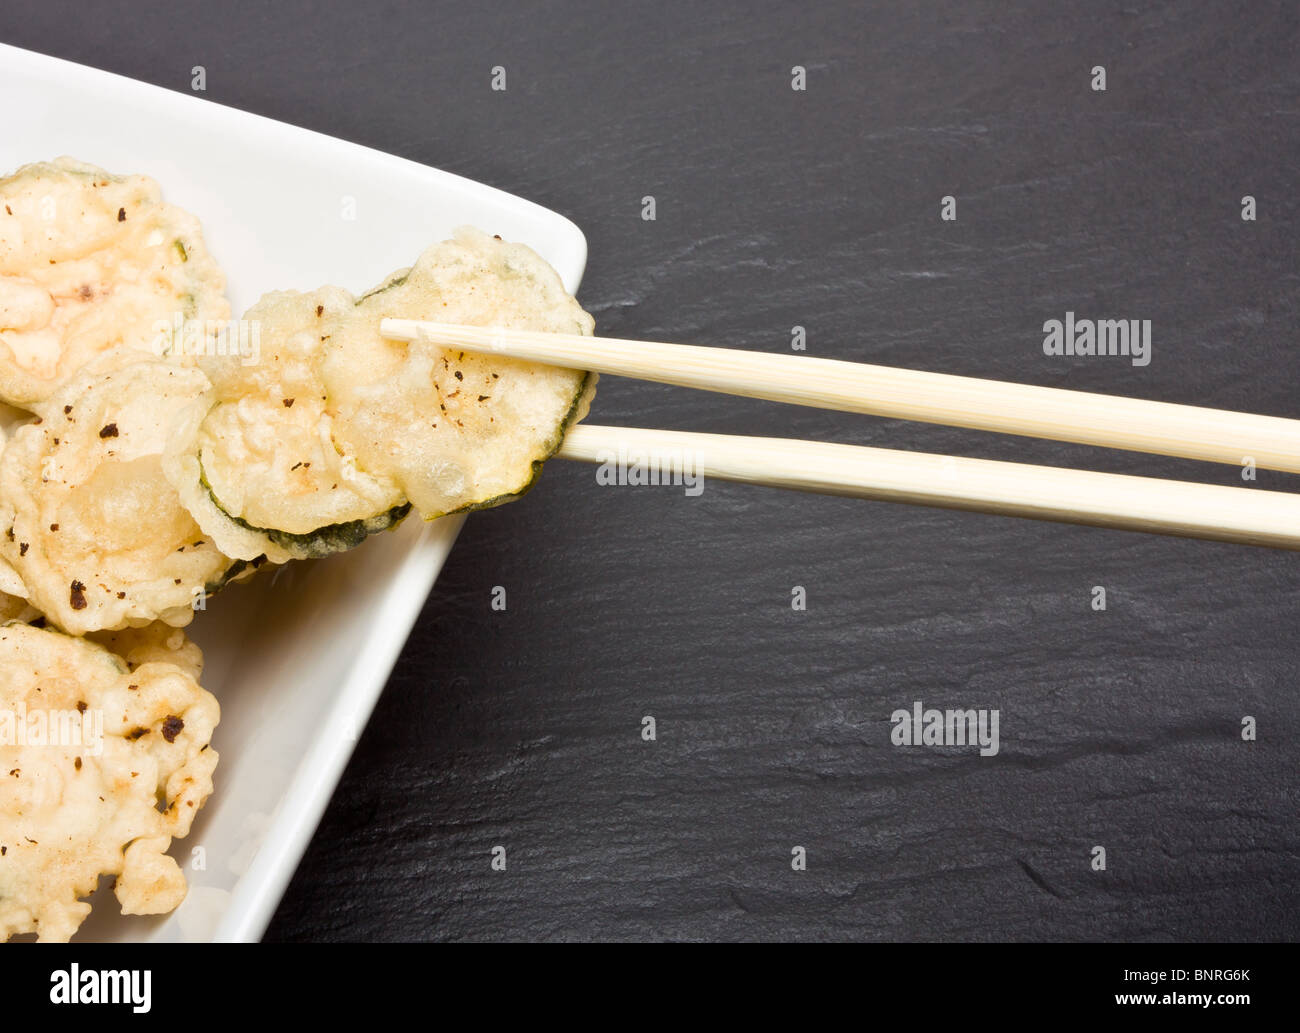 Deep fried courgette covered in tempura batter. Stock Photo